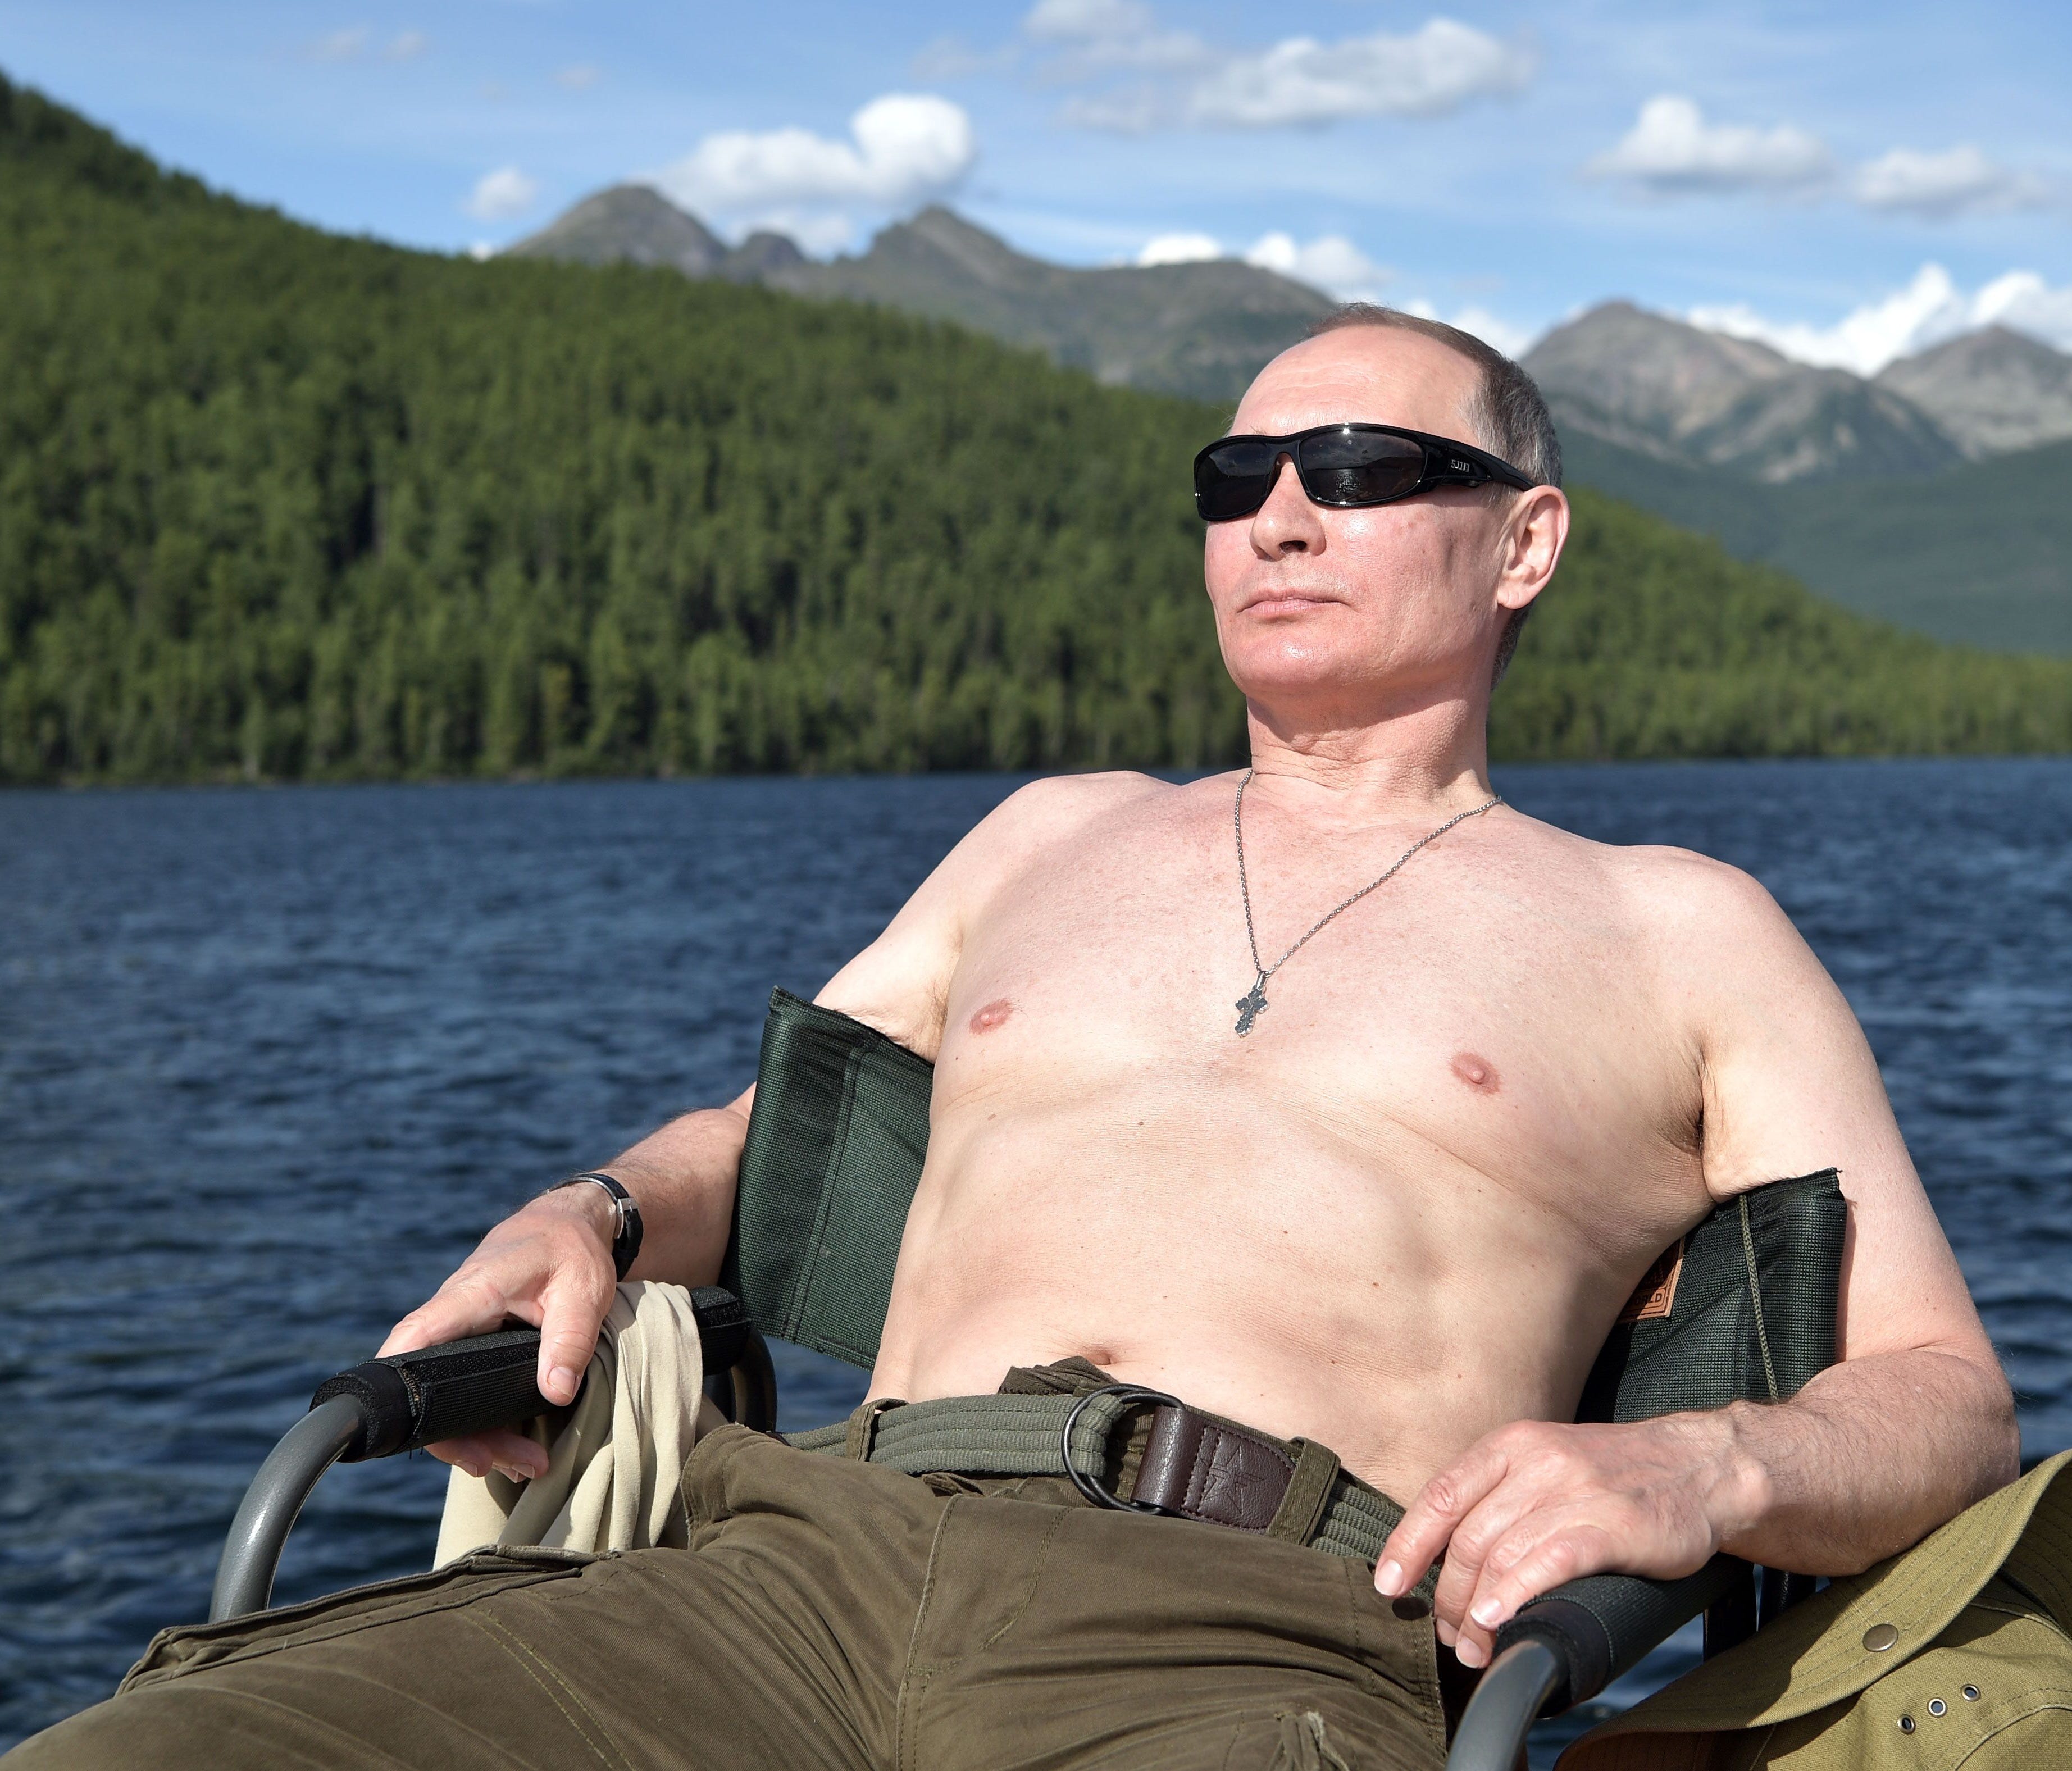 Russian President Vladimir Putin sunbathes during his vacation in the remote Tuva region in southern Siberia.